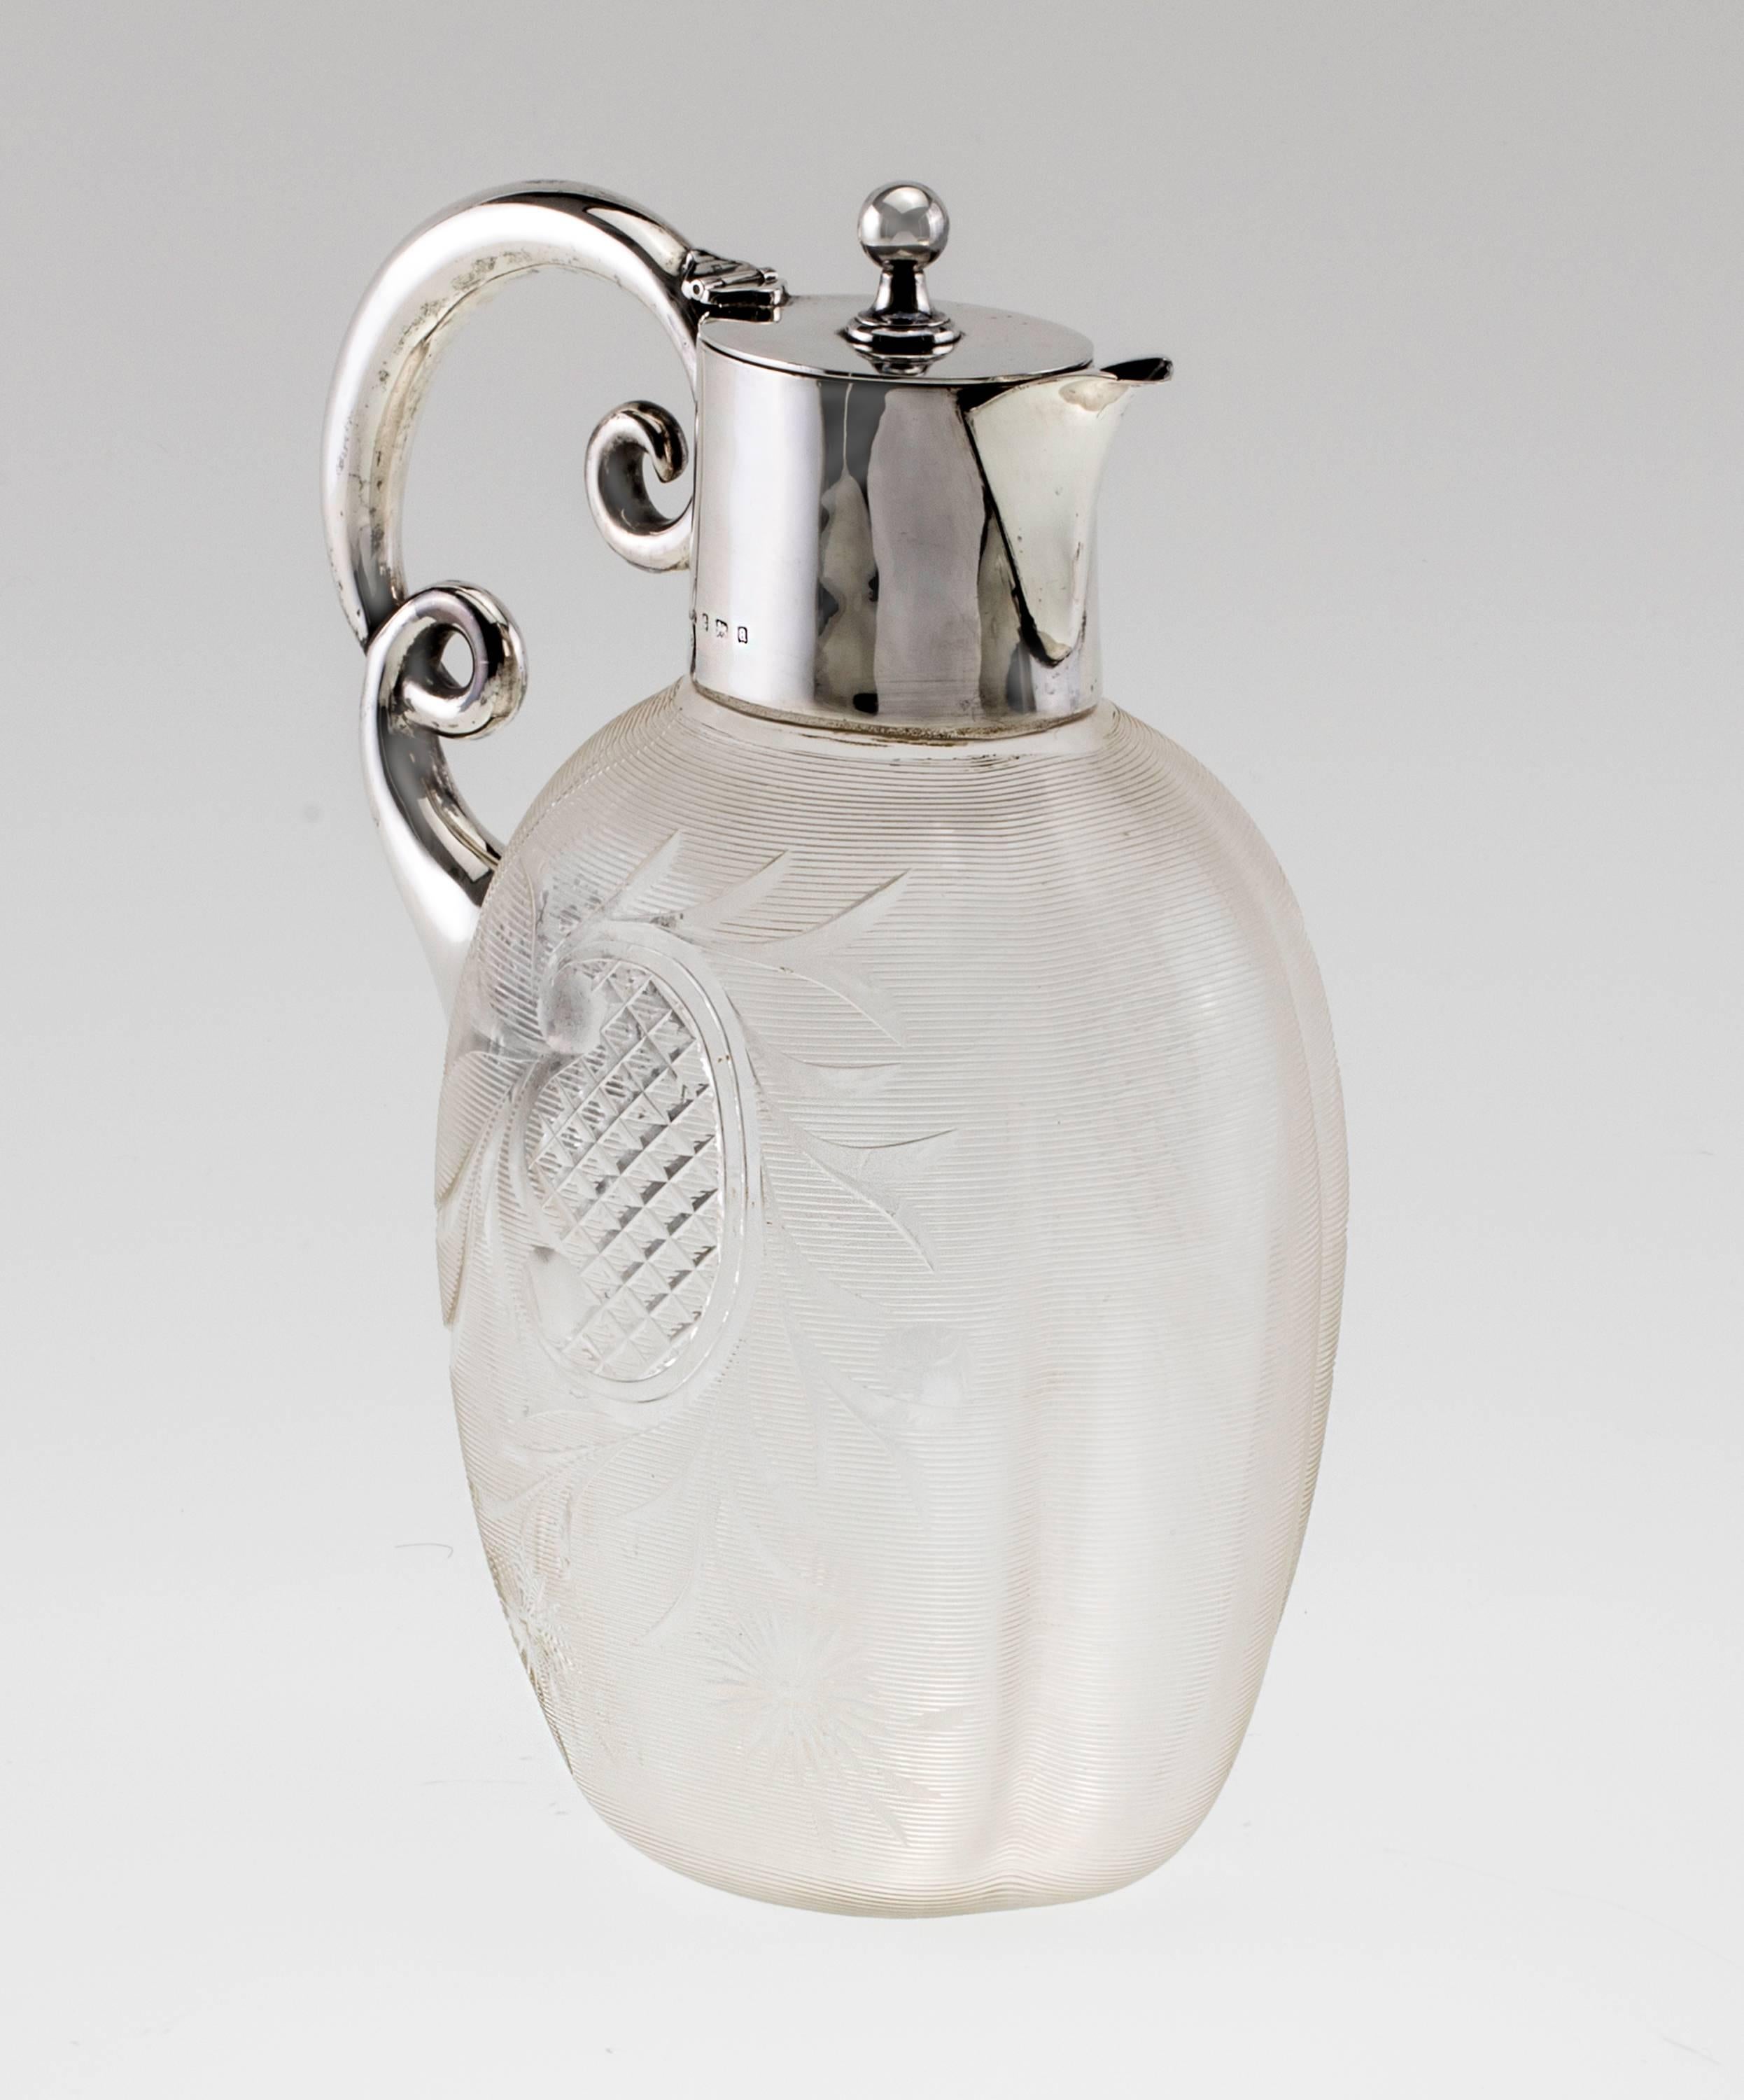 Fine, elegant Sterling silver mount Claret Jug. Base is Crystal glass textured in fine etched lines and cut floral design. English Hallmarked on the silver neck. Lovely double curly handle design.